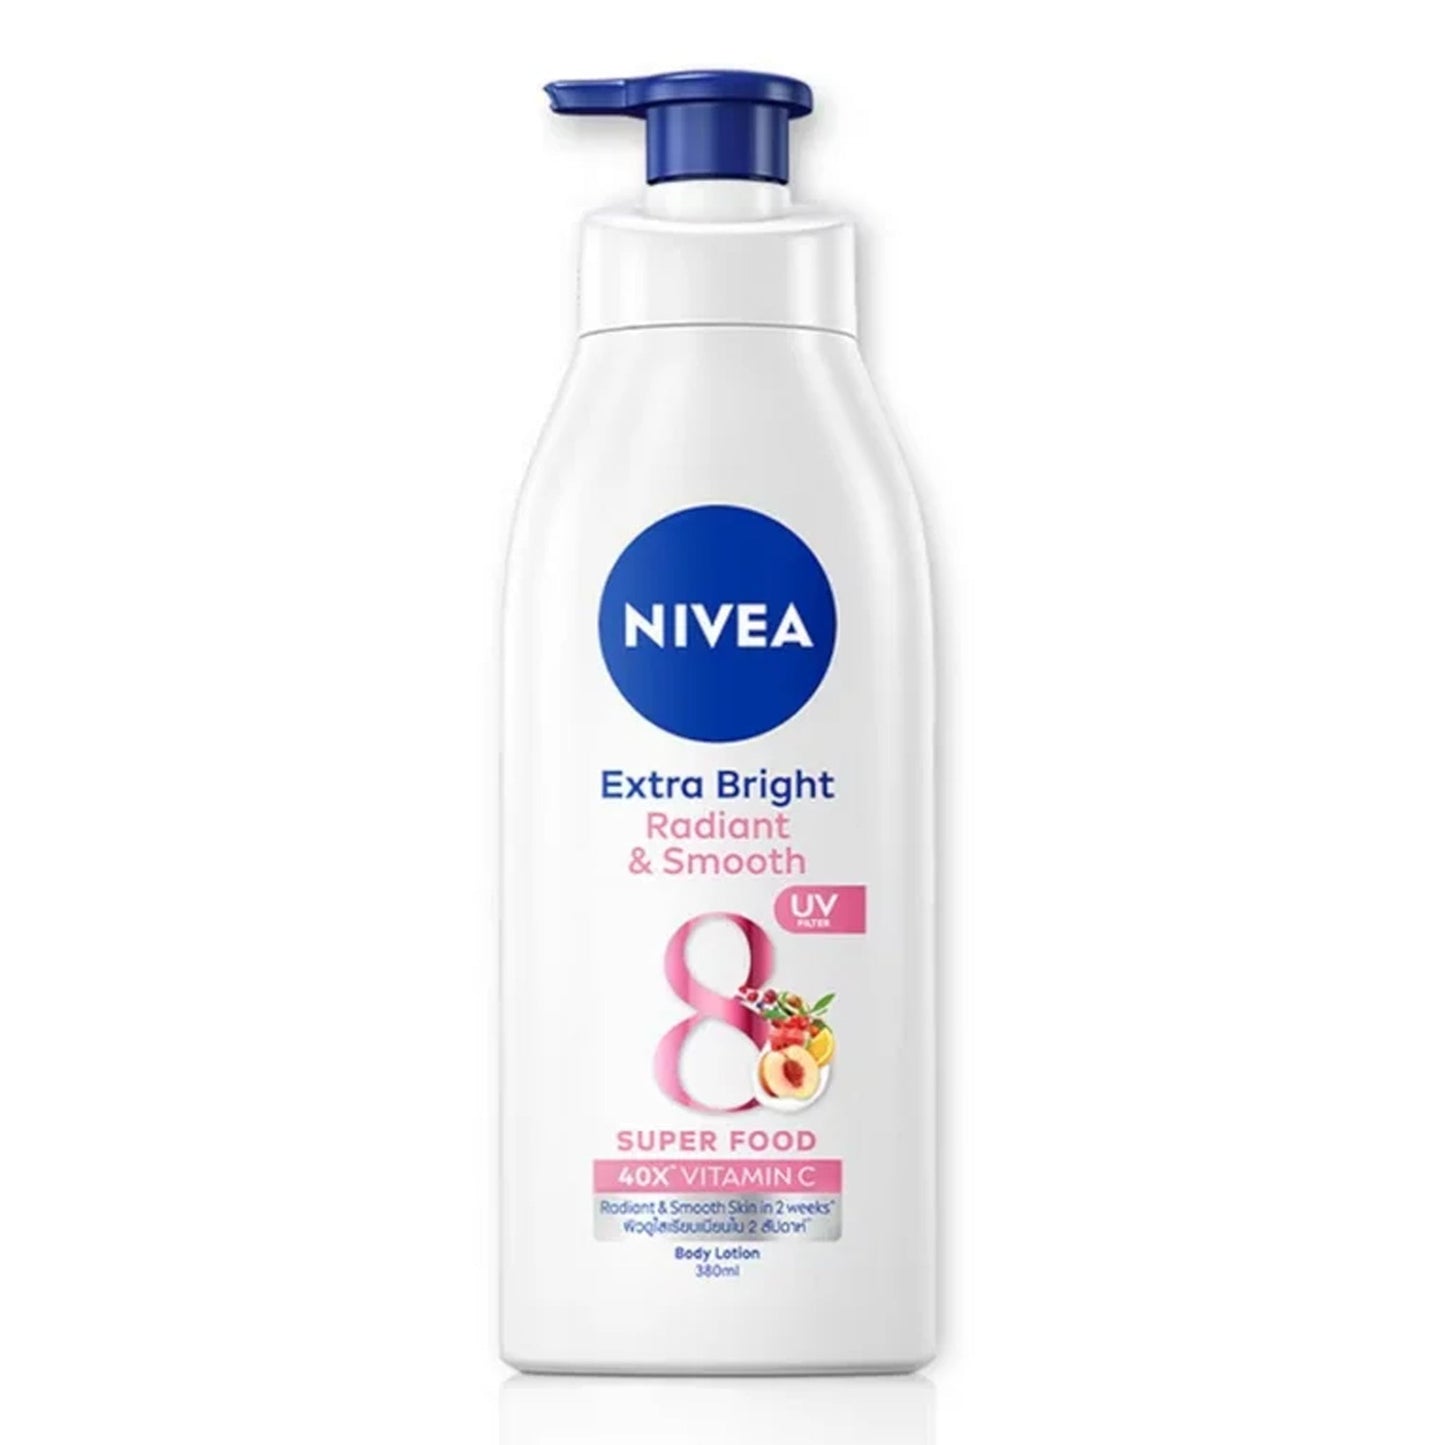 NIVEA - EXTRA BRIGHT RADIANT & SMOOTH 8 SUPER FOOD BODY LOTION WITH UV FILTER - 380ML